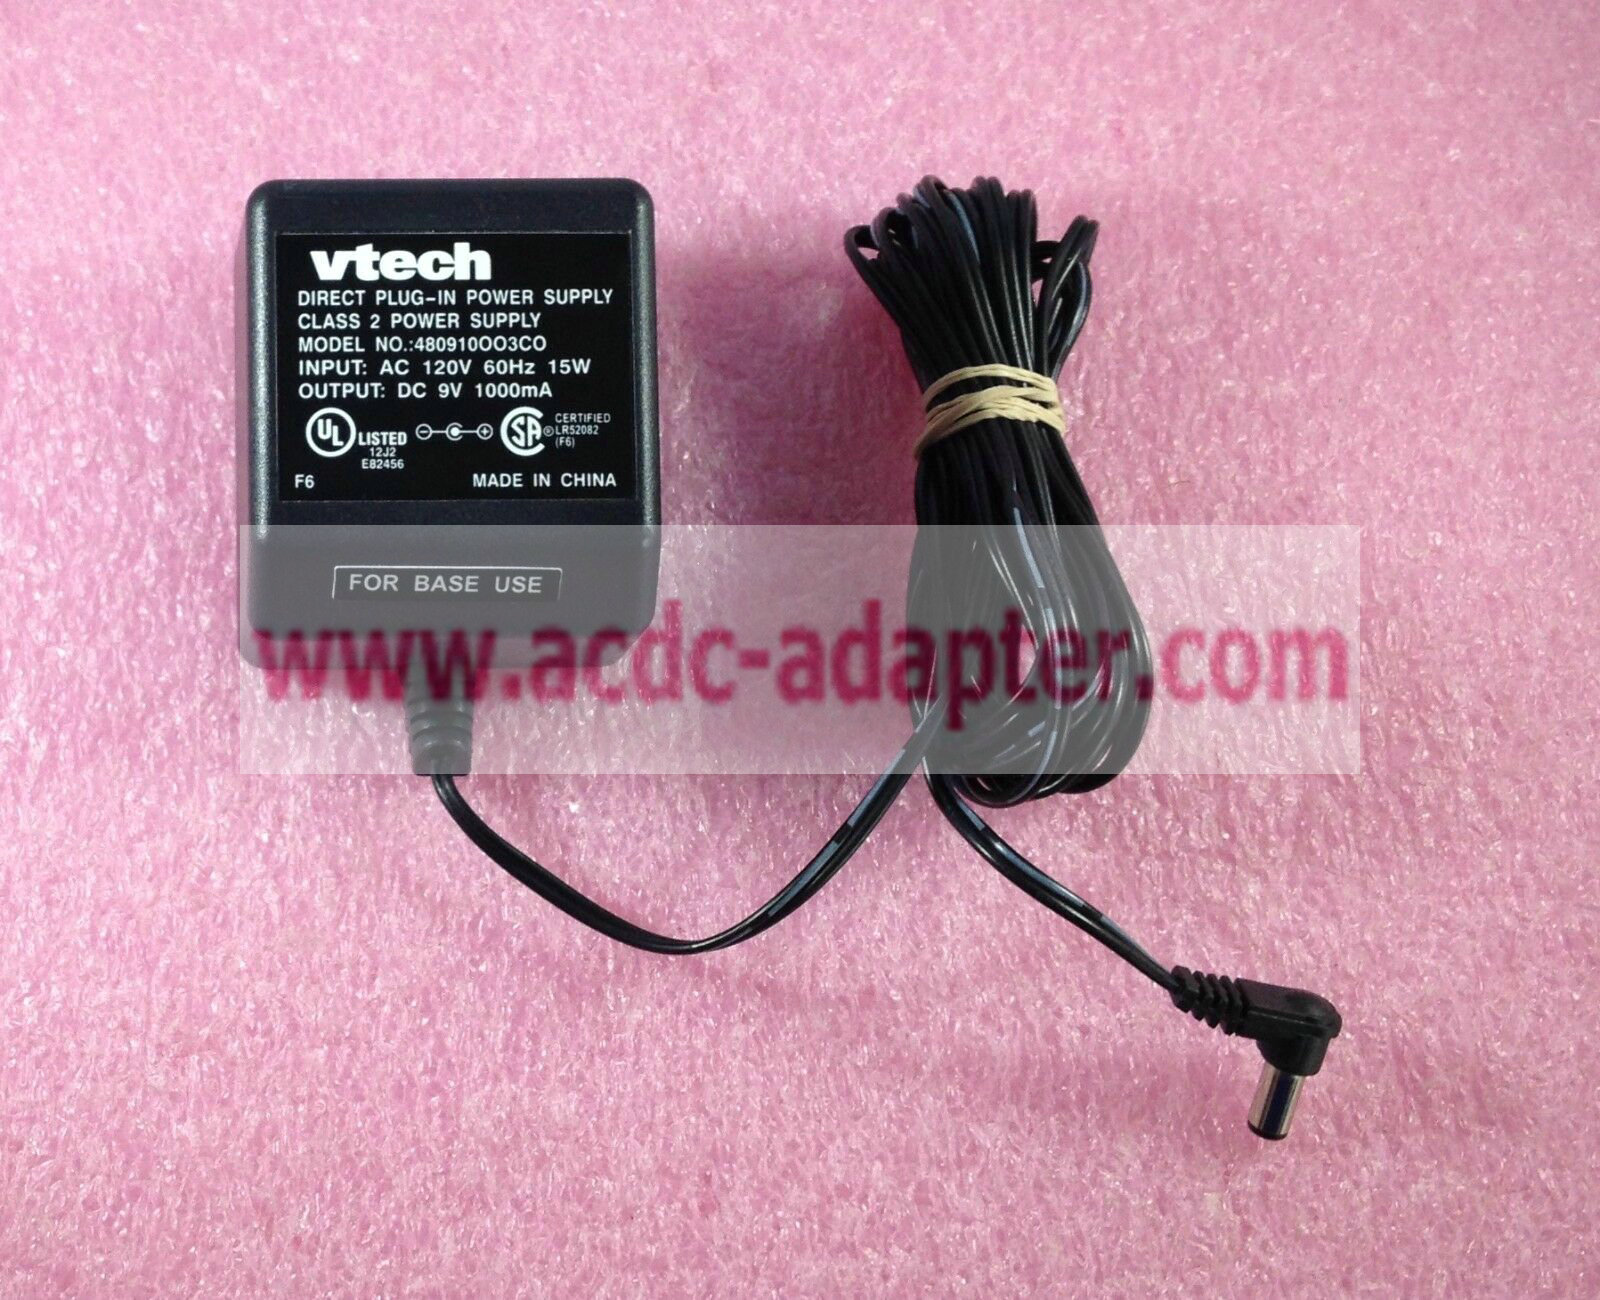 9VDC 1000mA ac adapter for VTECH 480910OO3CO DIRECT PLUG-IN POWER SUPPLY - Click Image to Close